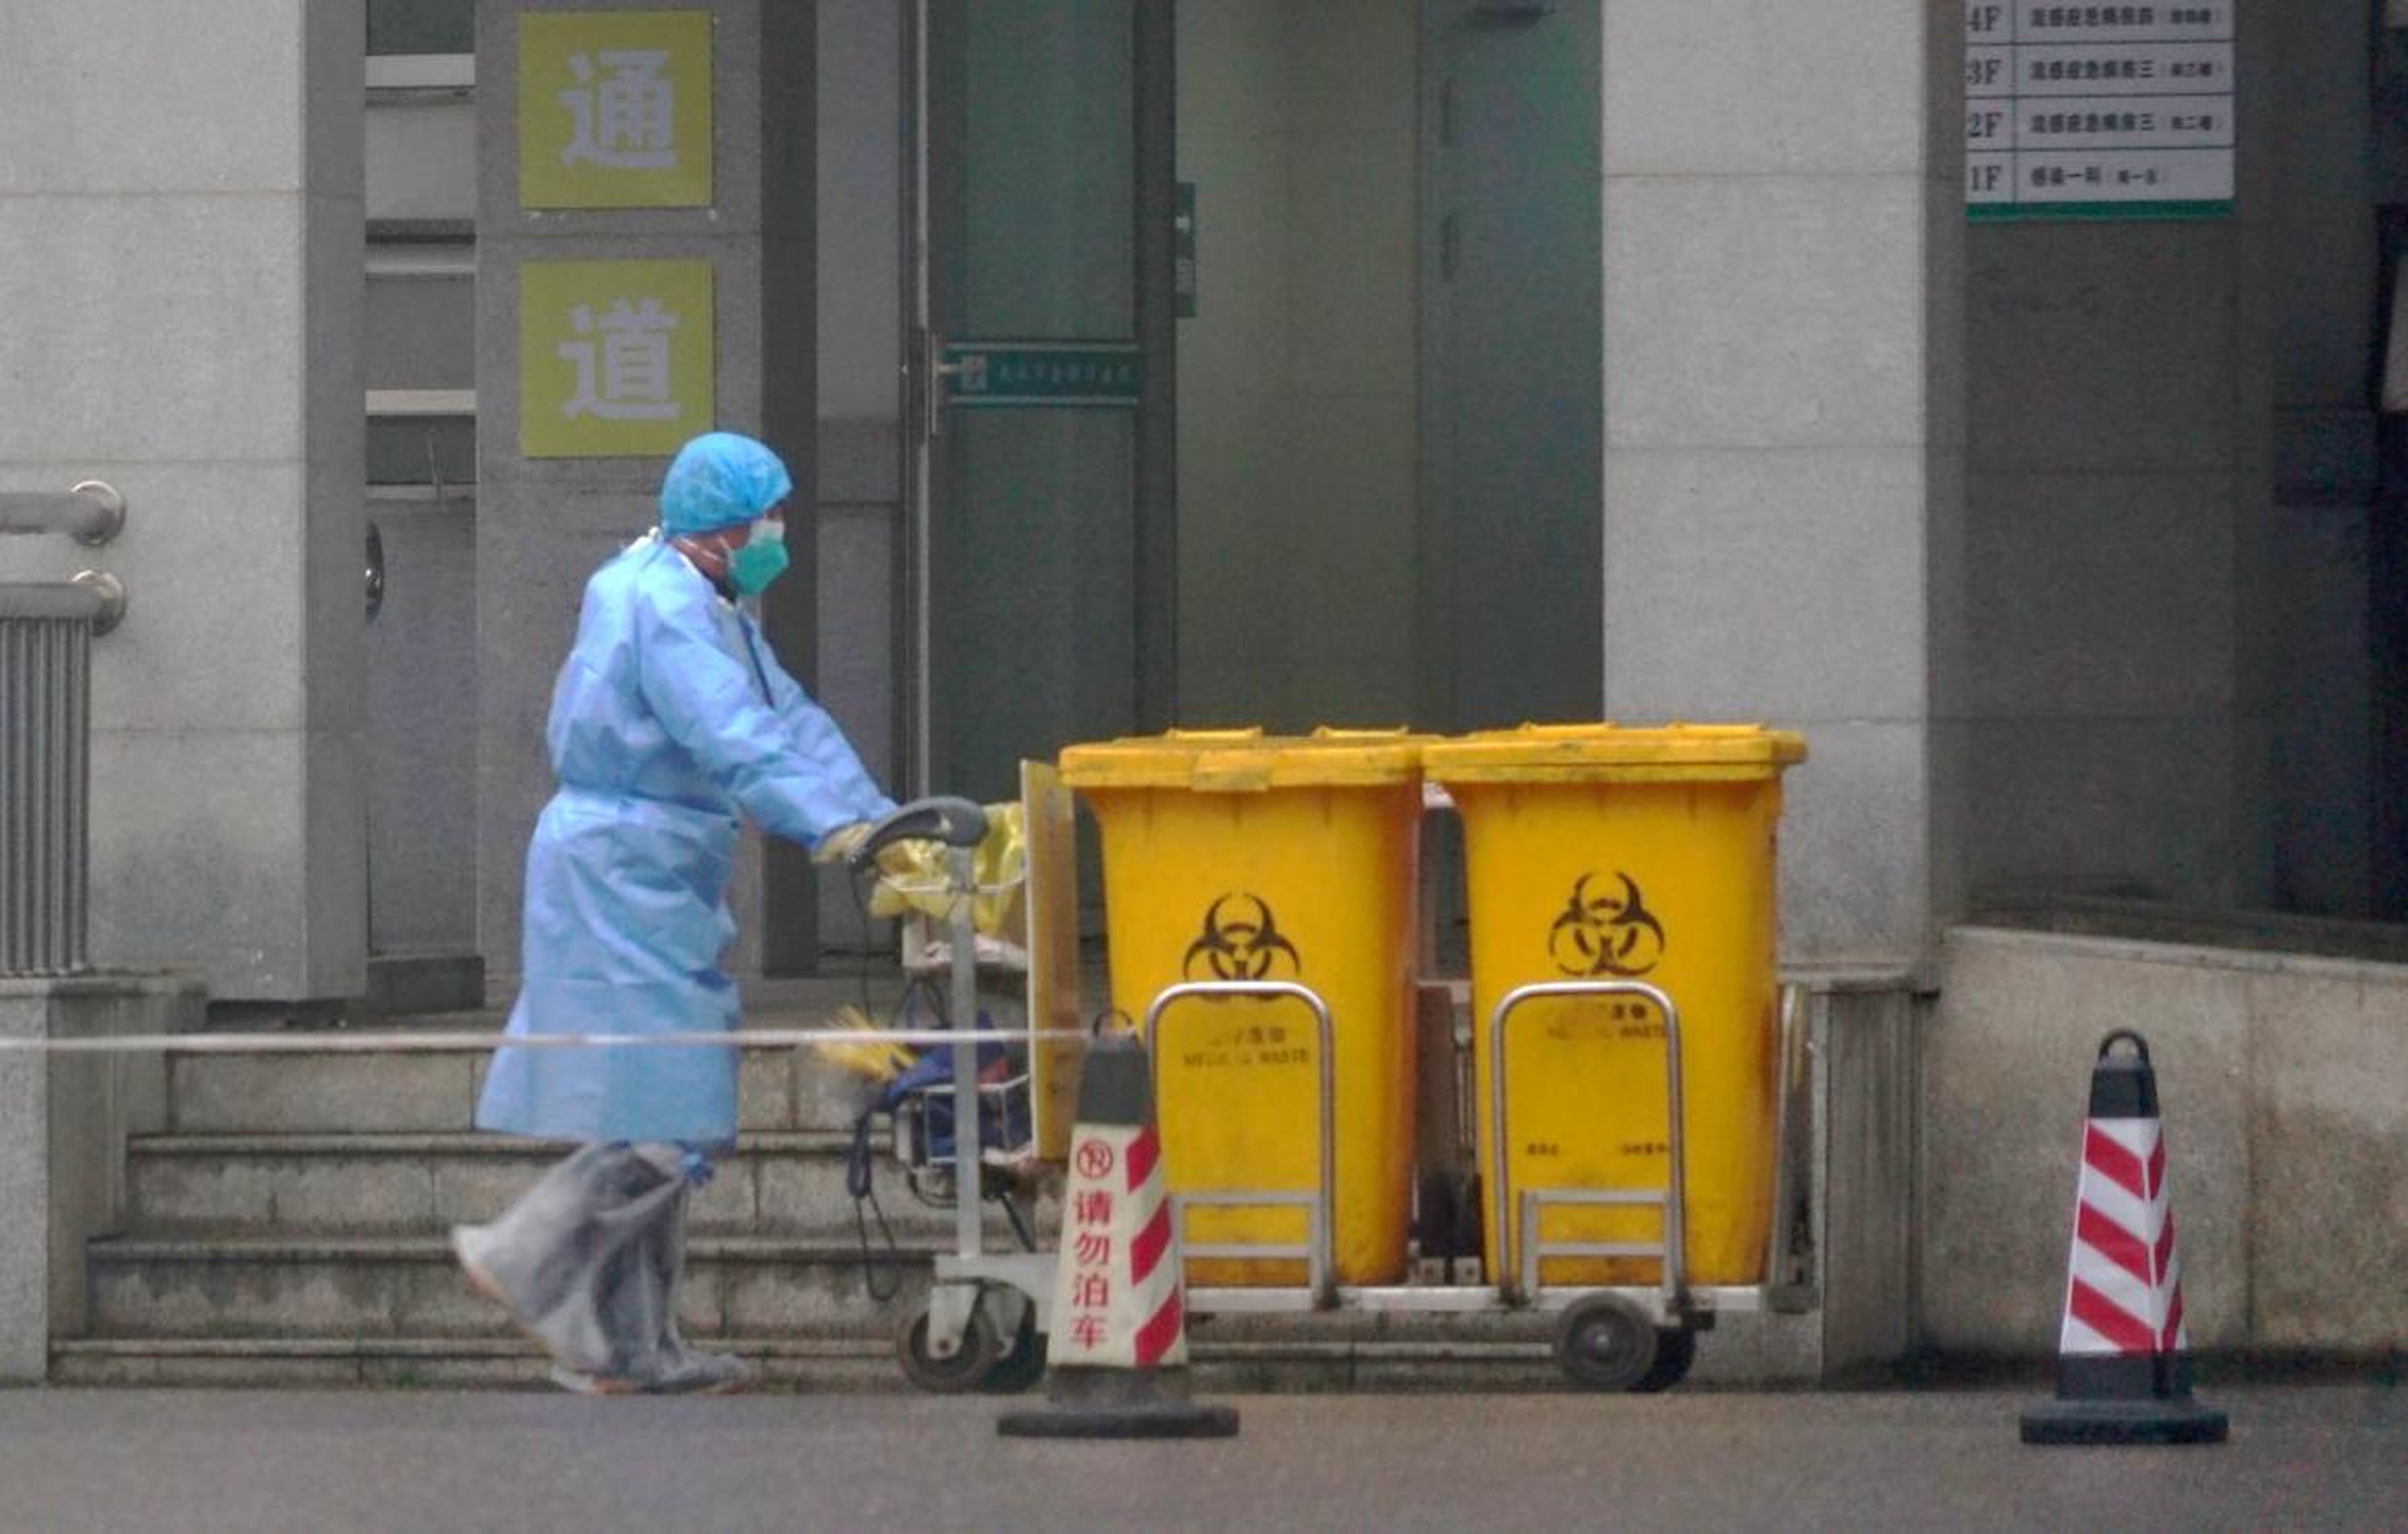 A staff member moves bio-waste containers past the entrance of the Wuhan Medical Treatment Center in Wuhan, China, where some people infected with a coronavirus were being treated on January 22, 2020.